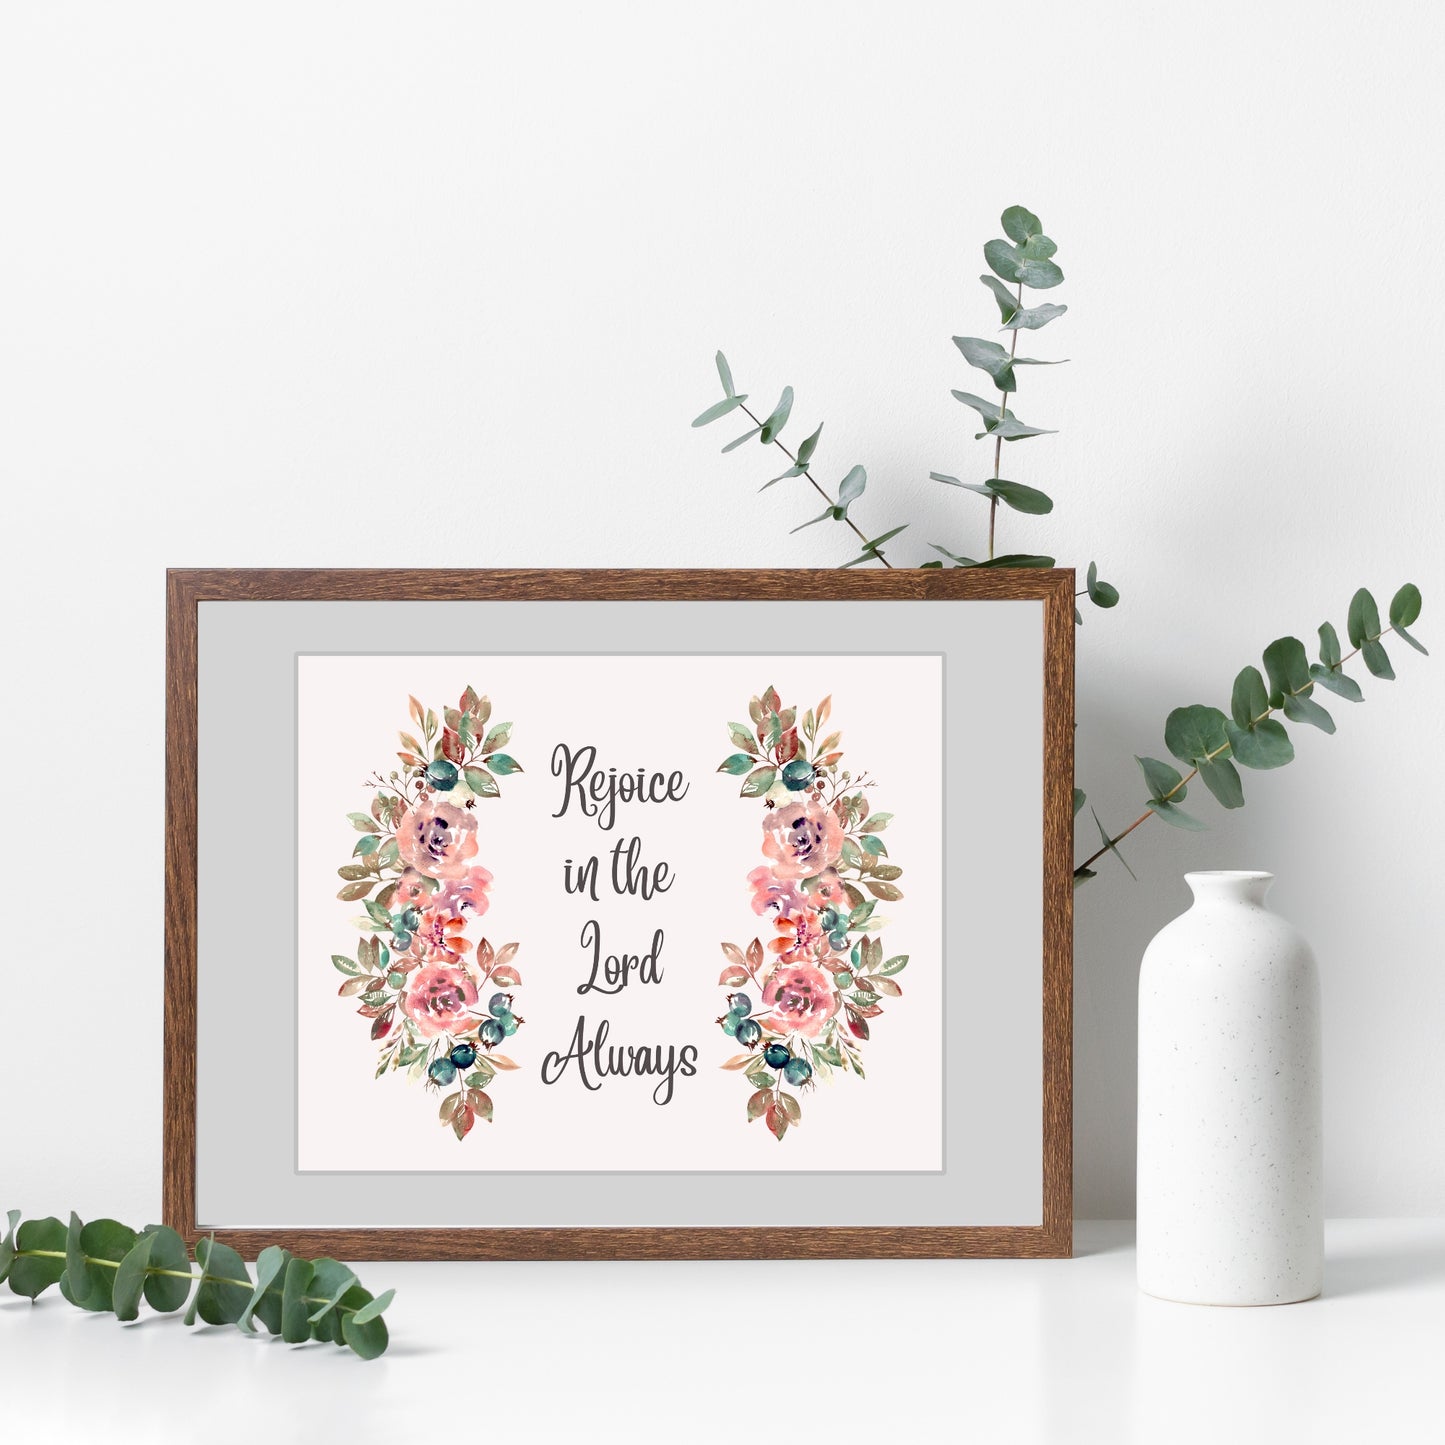 Inspirational Word Art - Rejoice in the Lord Always - Vintage Style Wall Decor (8x10 print) | Vintage Style Floral Wall Art shown in wood frame with neutral mat board | oak7west.com